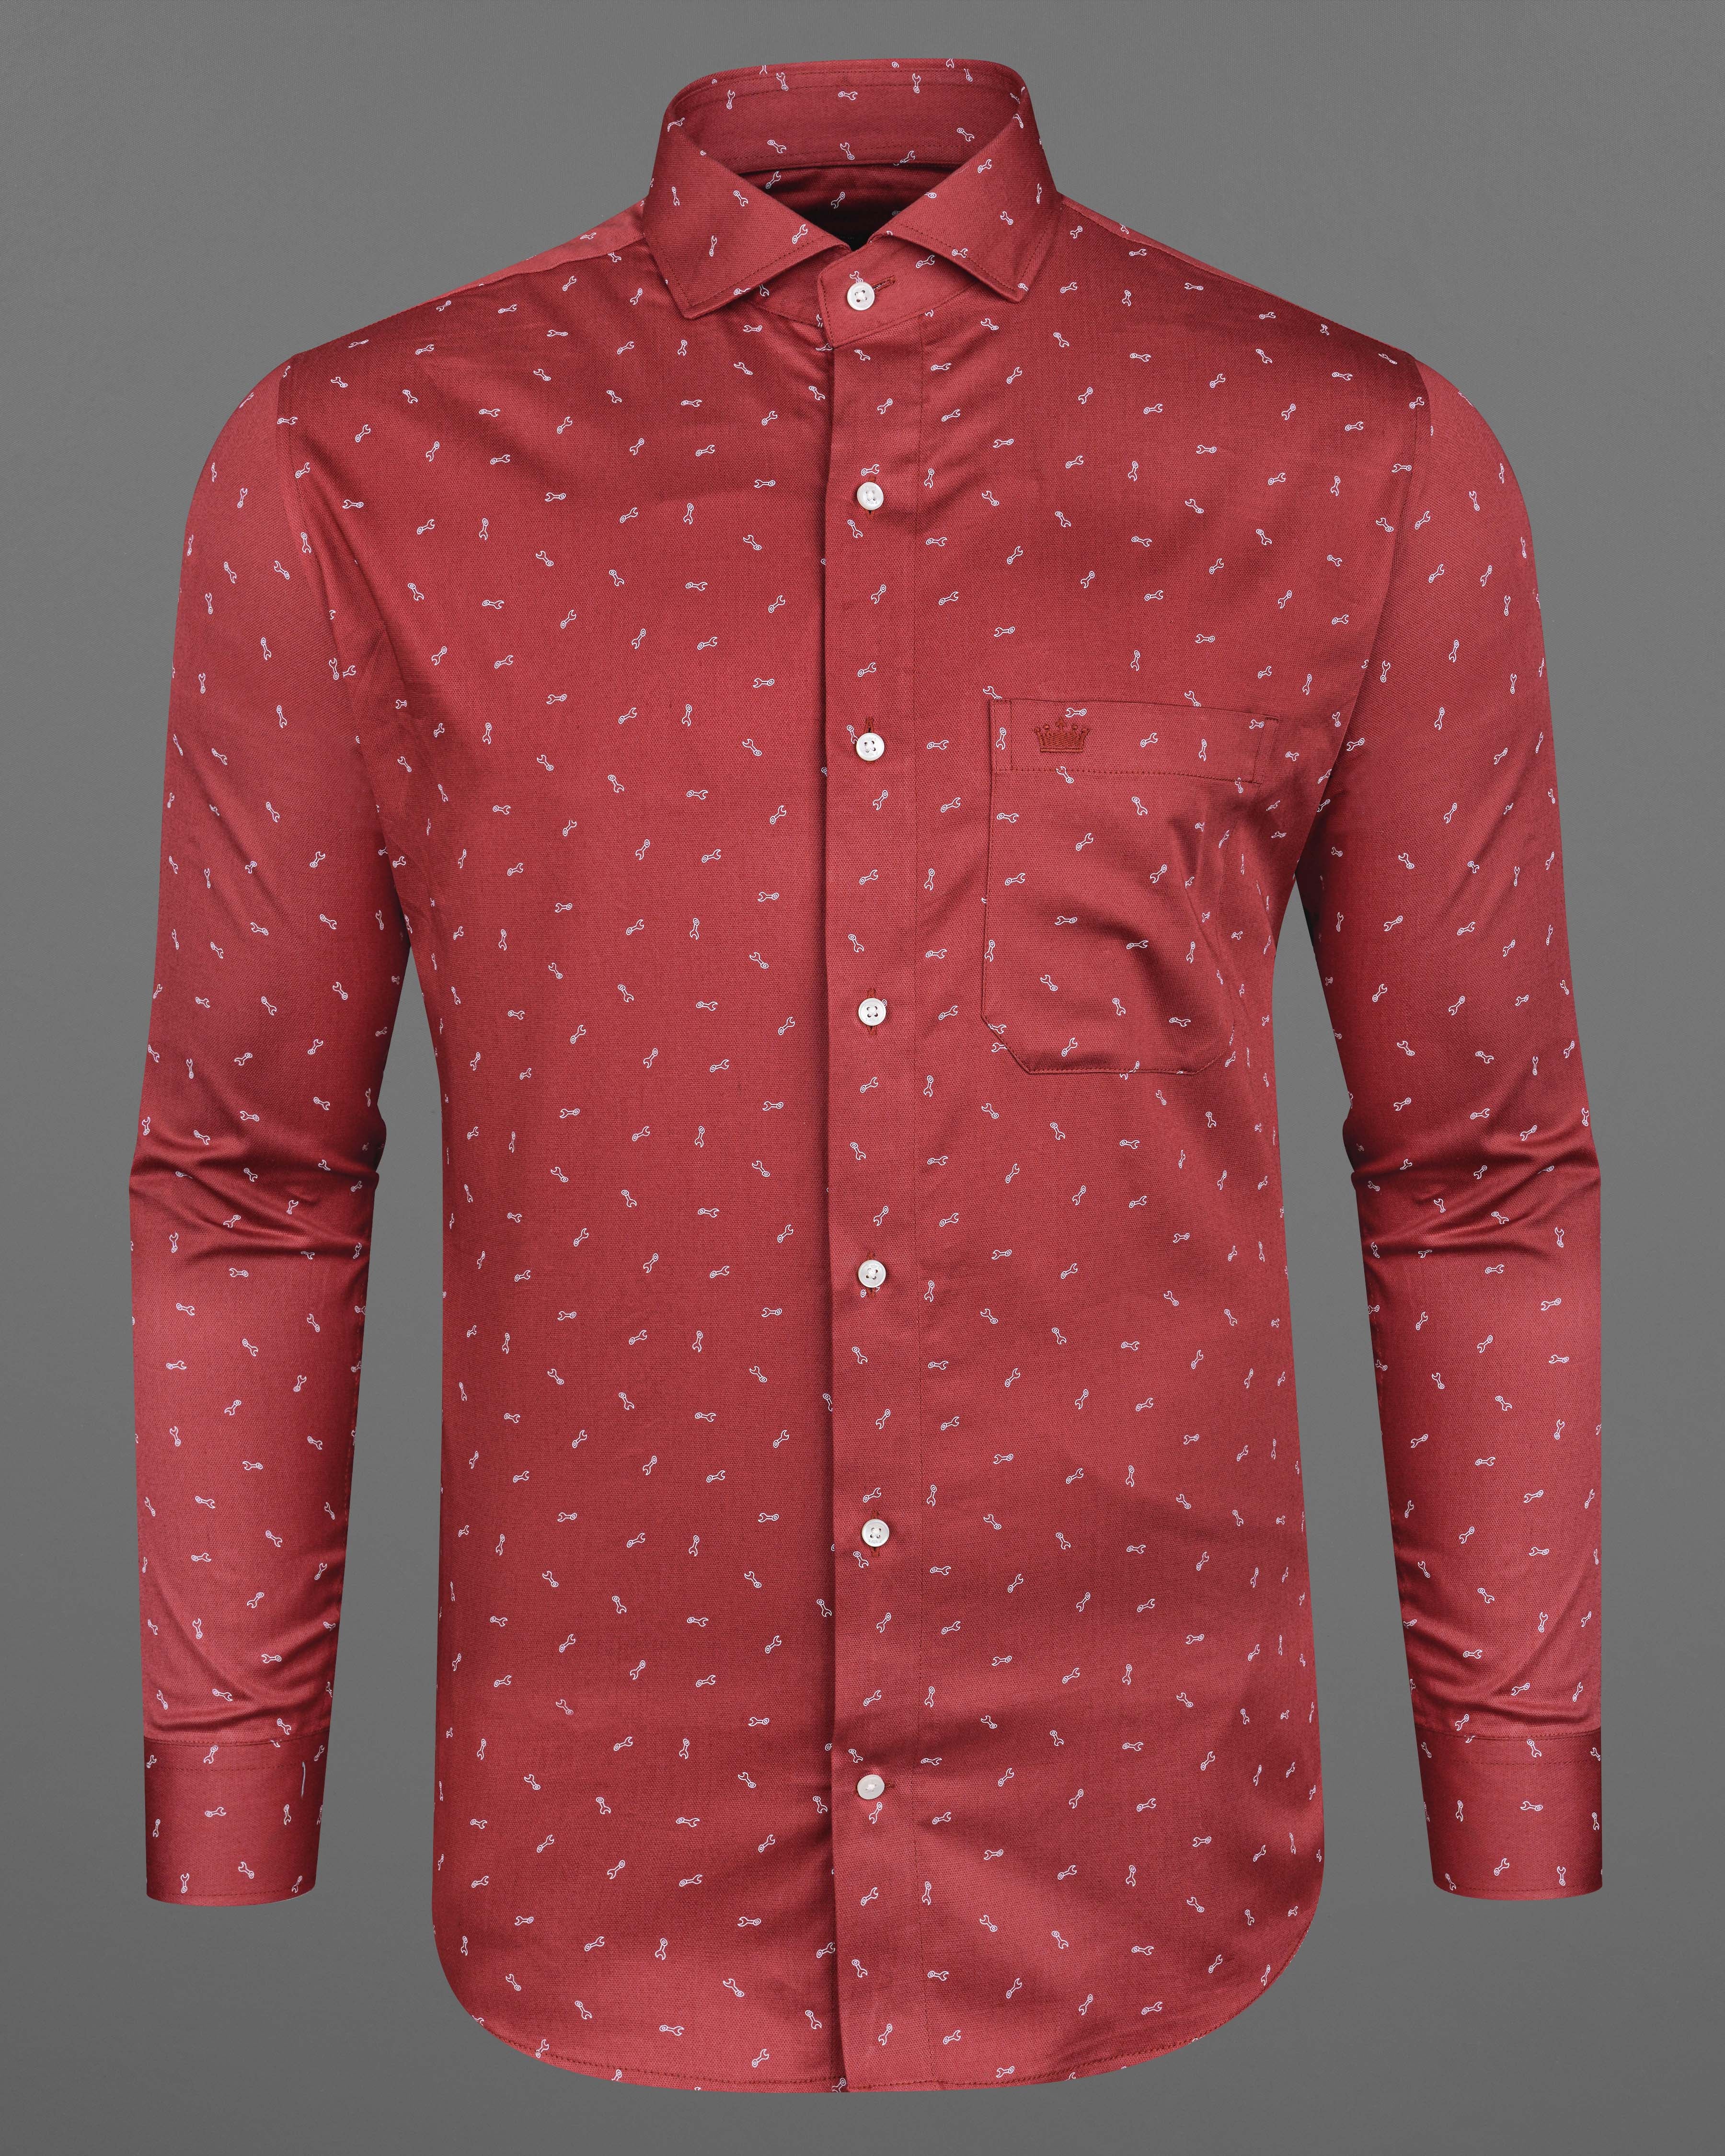 Stiletto Red Spanner Printed Royal Oxford Shirt 8319-CA -38,8319-CA -H-38,8319-CA -39,8319-CA -H-39,8319-CA -40,8319-CA -H-40,8319-CA -42,8319-CA -H-42,8319-CA -44,8319-CA -H-44,8319-CA -46,8319-CA -H-46,8319-CA -48,8319-CA -H-48,8319-CA -50,8319-CA -H-50,8319-CA -52,8319-CA -H-52